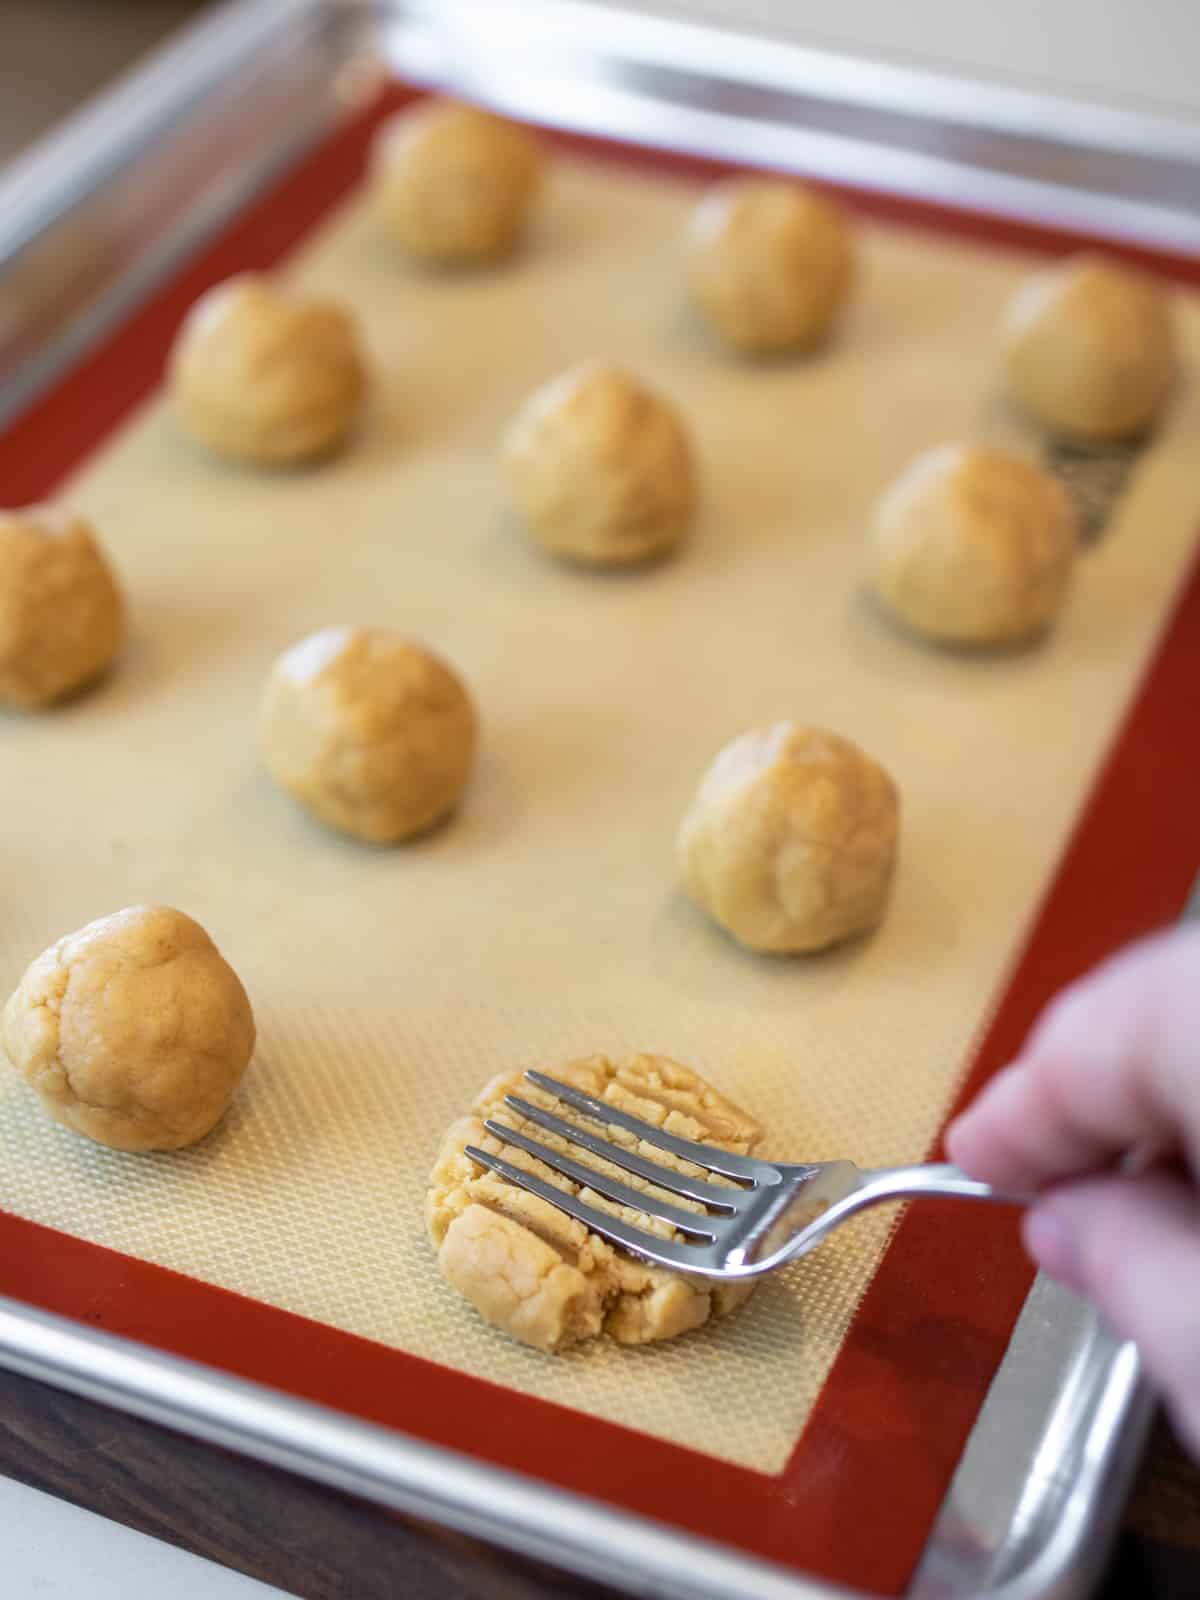 A fork pressed into a ball of cookie dough resting on a baking sheet.